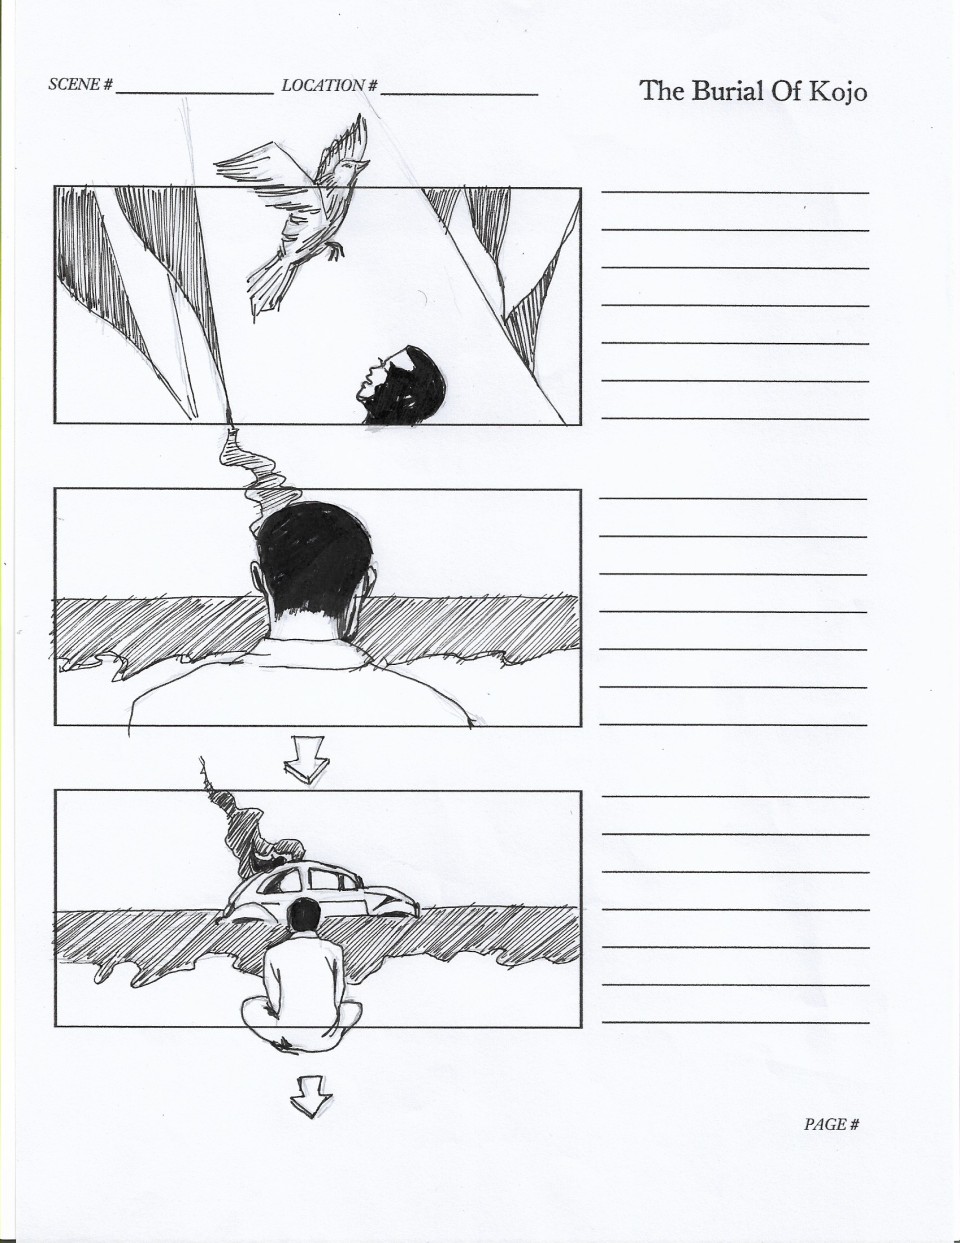 Storyboard from the film "The Burial of Kojo" shows three drawings of a person sitting on a beach. Lines for notes and captions are included next to each sketch.